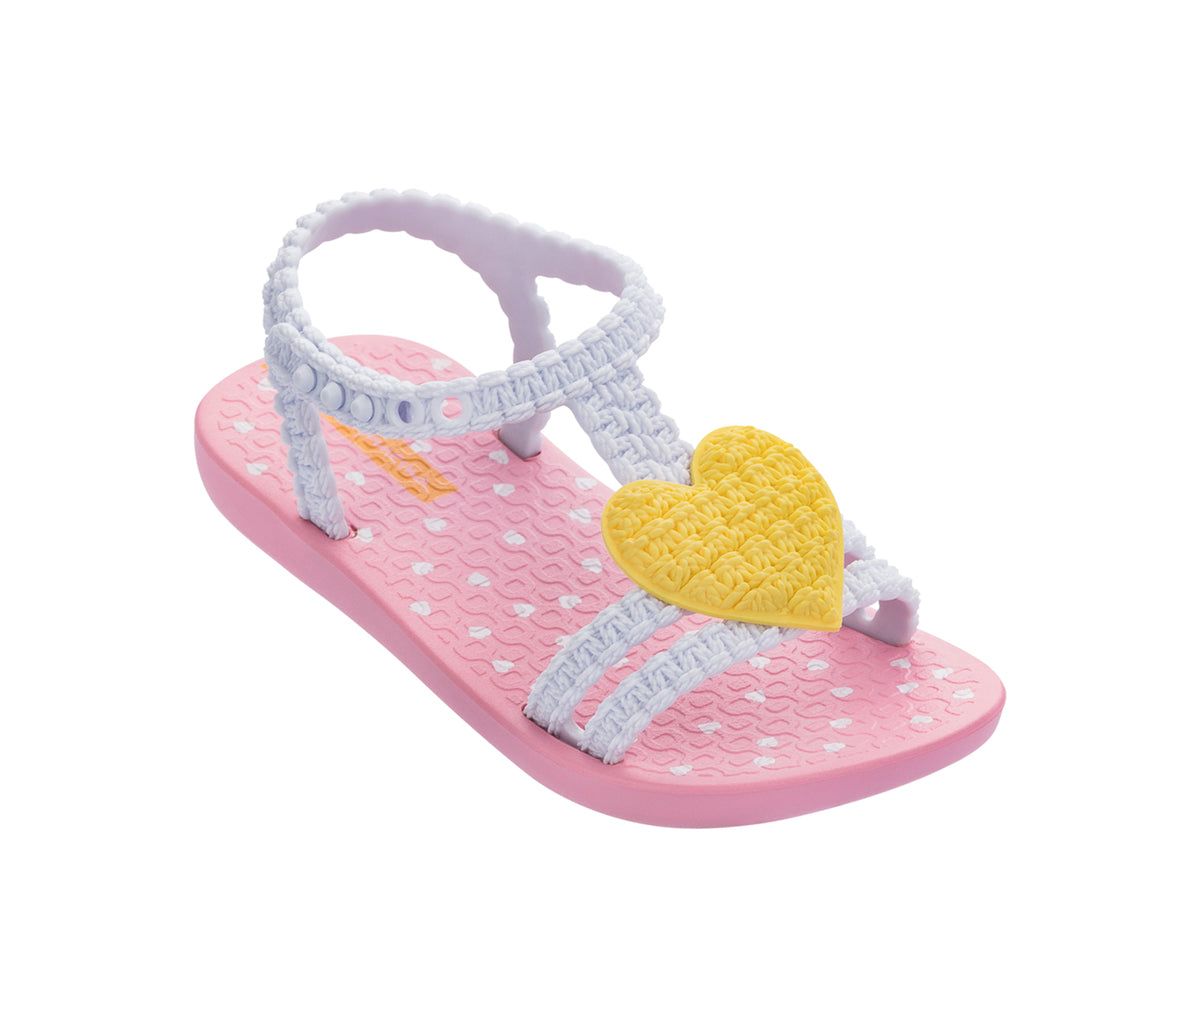 Angled view of a pink and white My First Ipanema Sandal with straps and a yellow crochet heart on top.